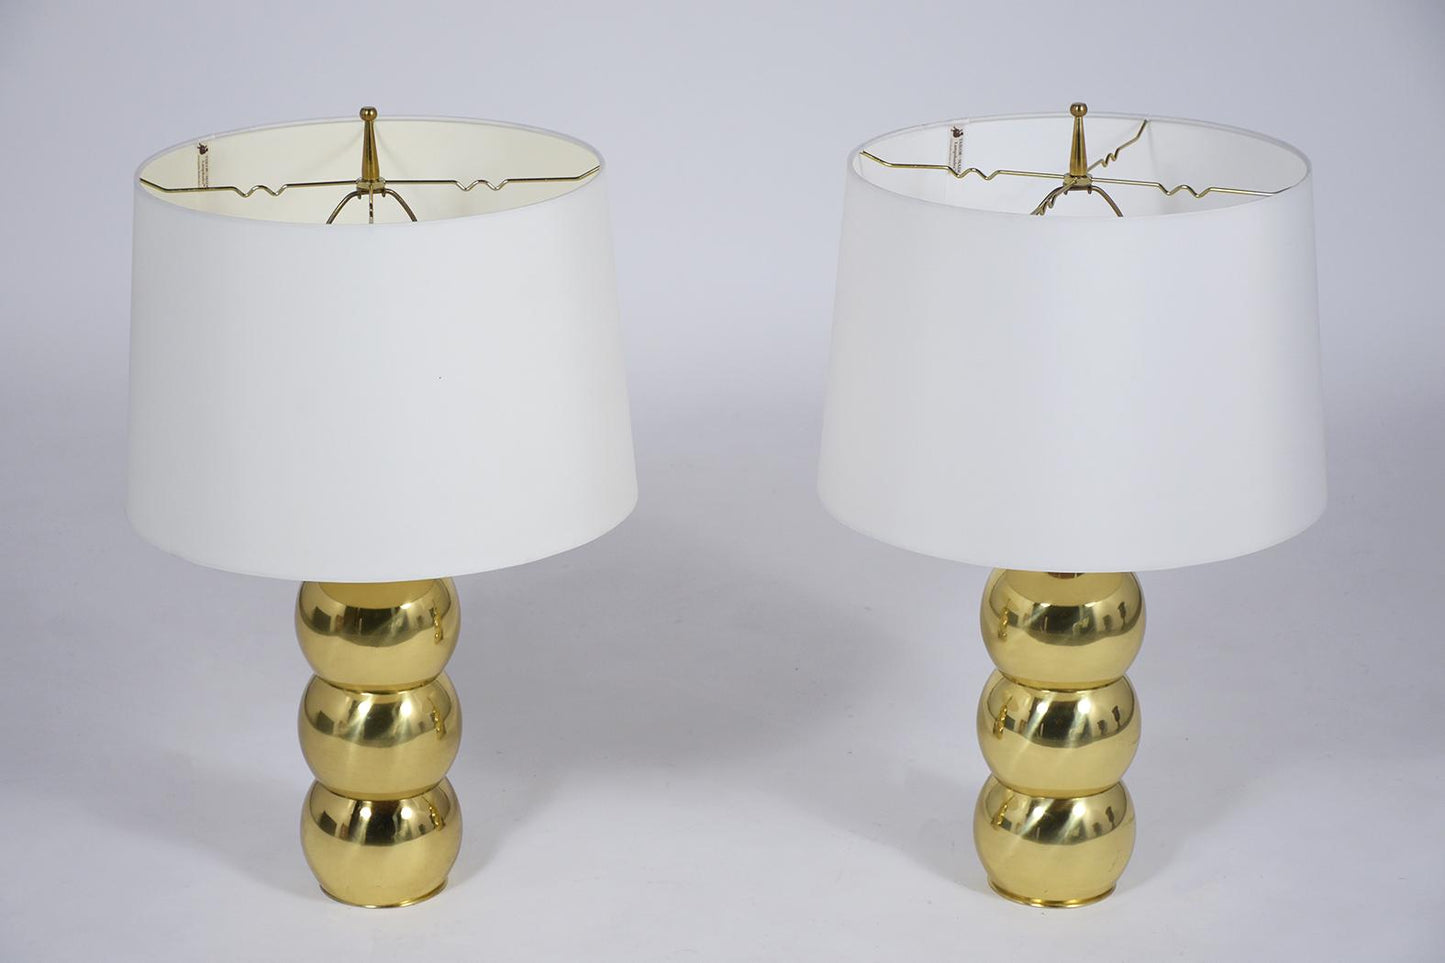 Pair of Brass Stacked Ball Table Lamps by George Kovacs